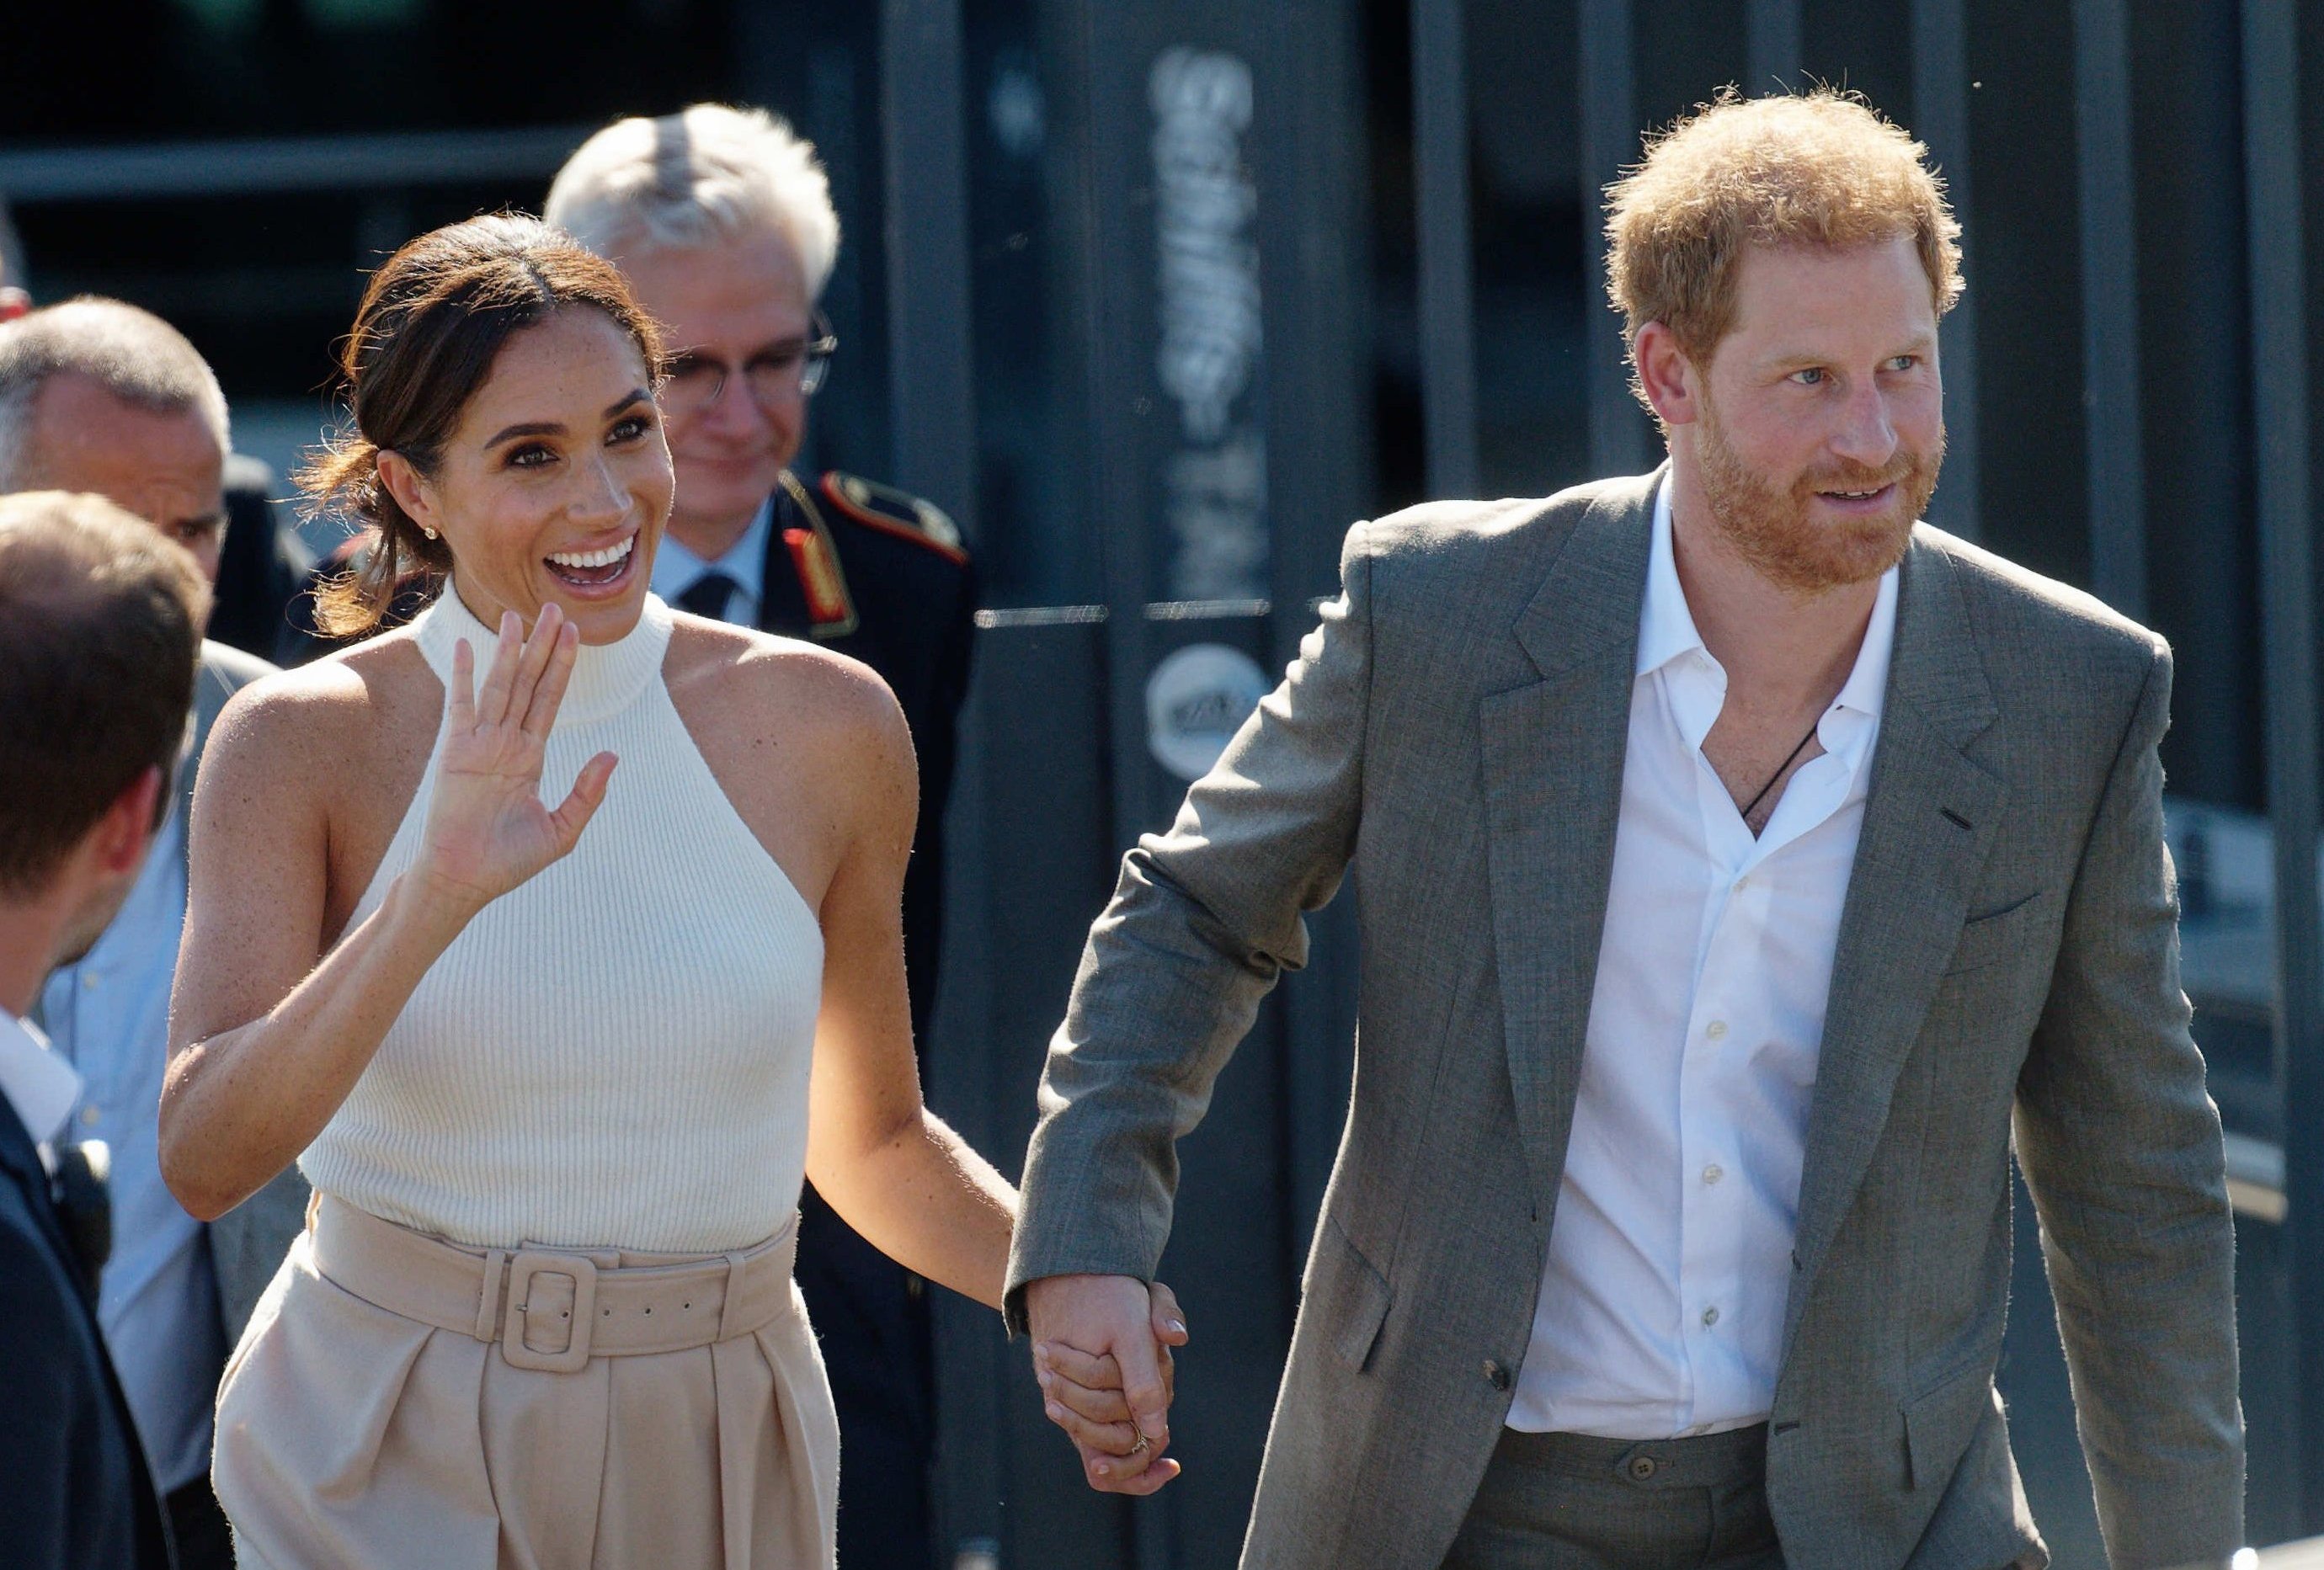 Prince Harry, Duke of Sussex, and his wife Meghan, Duchess of Sussex, walk to a car after taking a boat trip on the Rhine. | Source: Getty Images